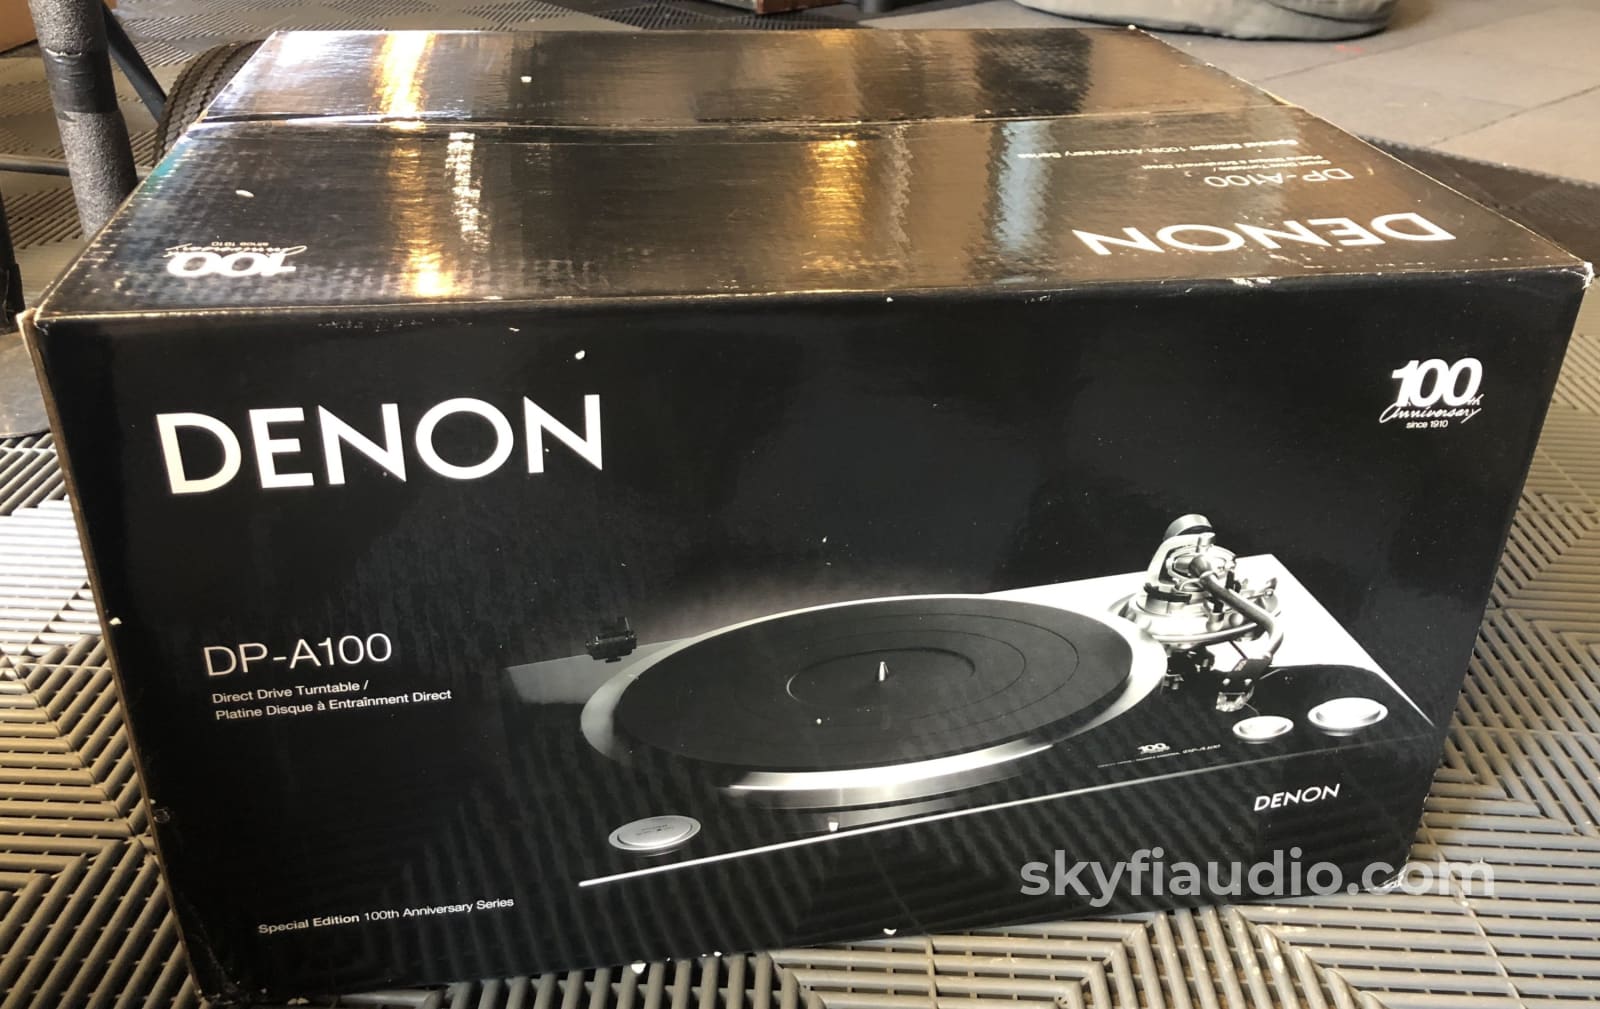 Denon Dp-A100 - 100Th Anniversary Limited Edition Turntable New Sealed Box Very Rare